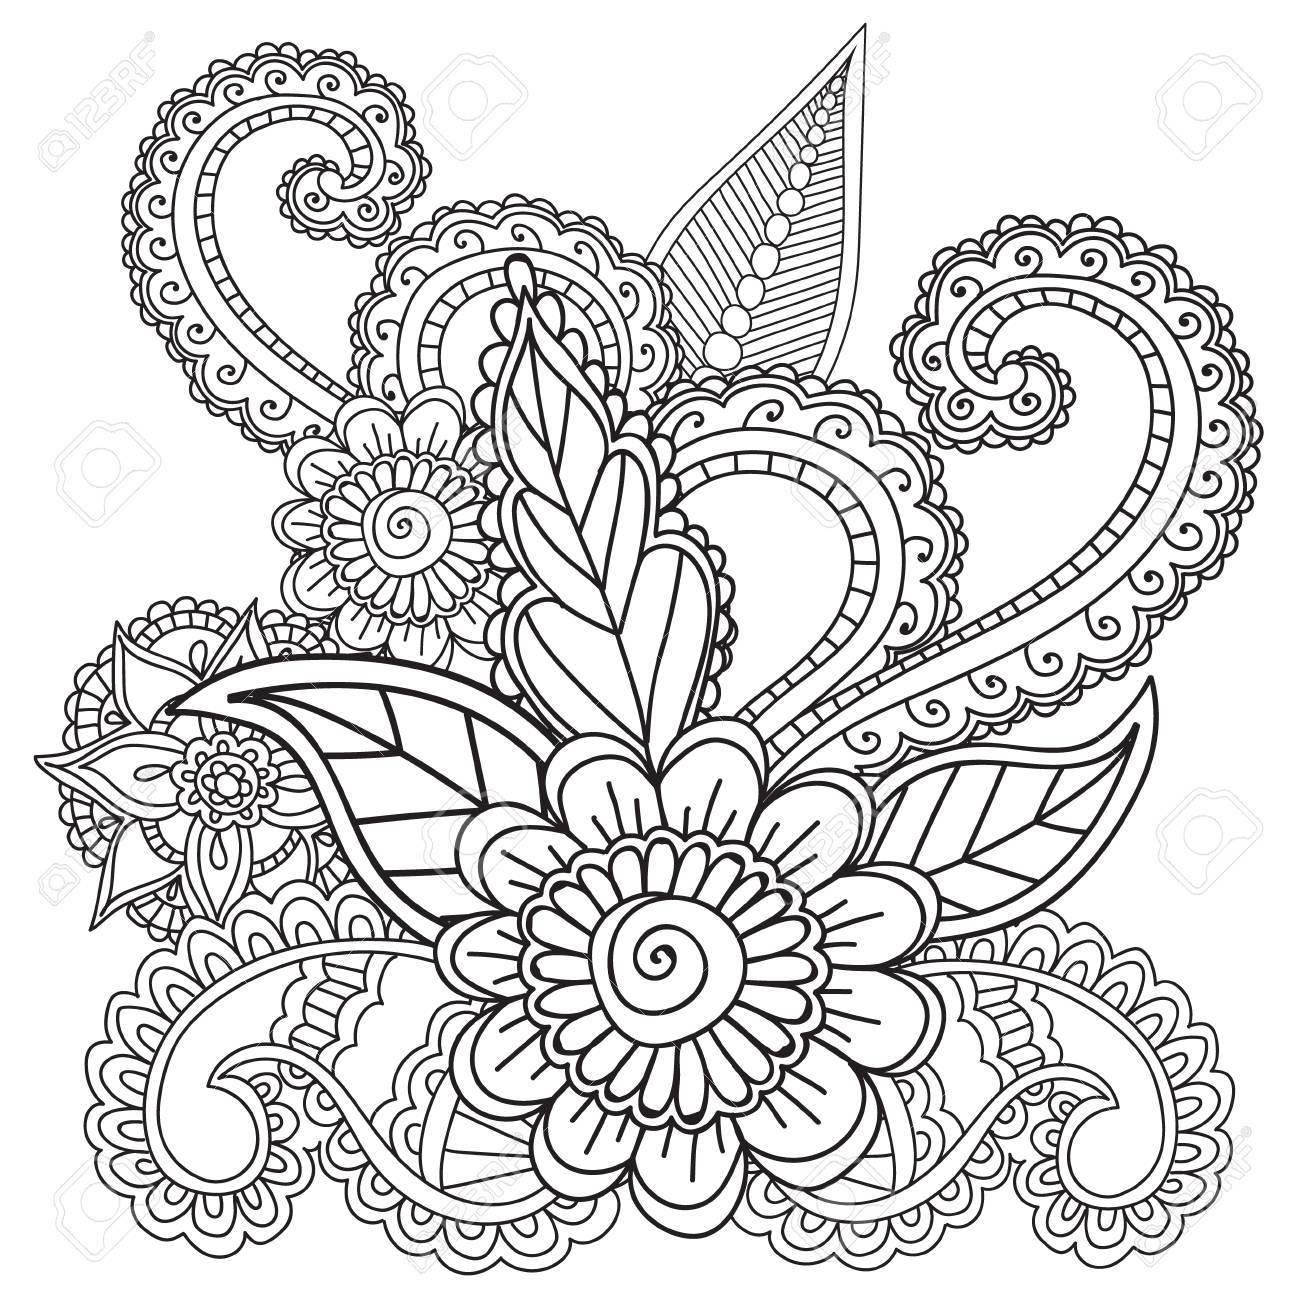 Henna Coloring Pages at Free printable colorings